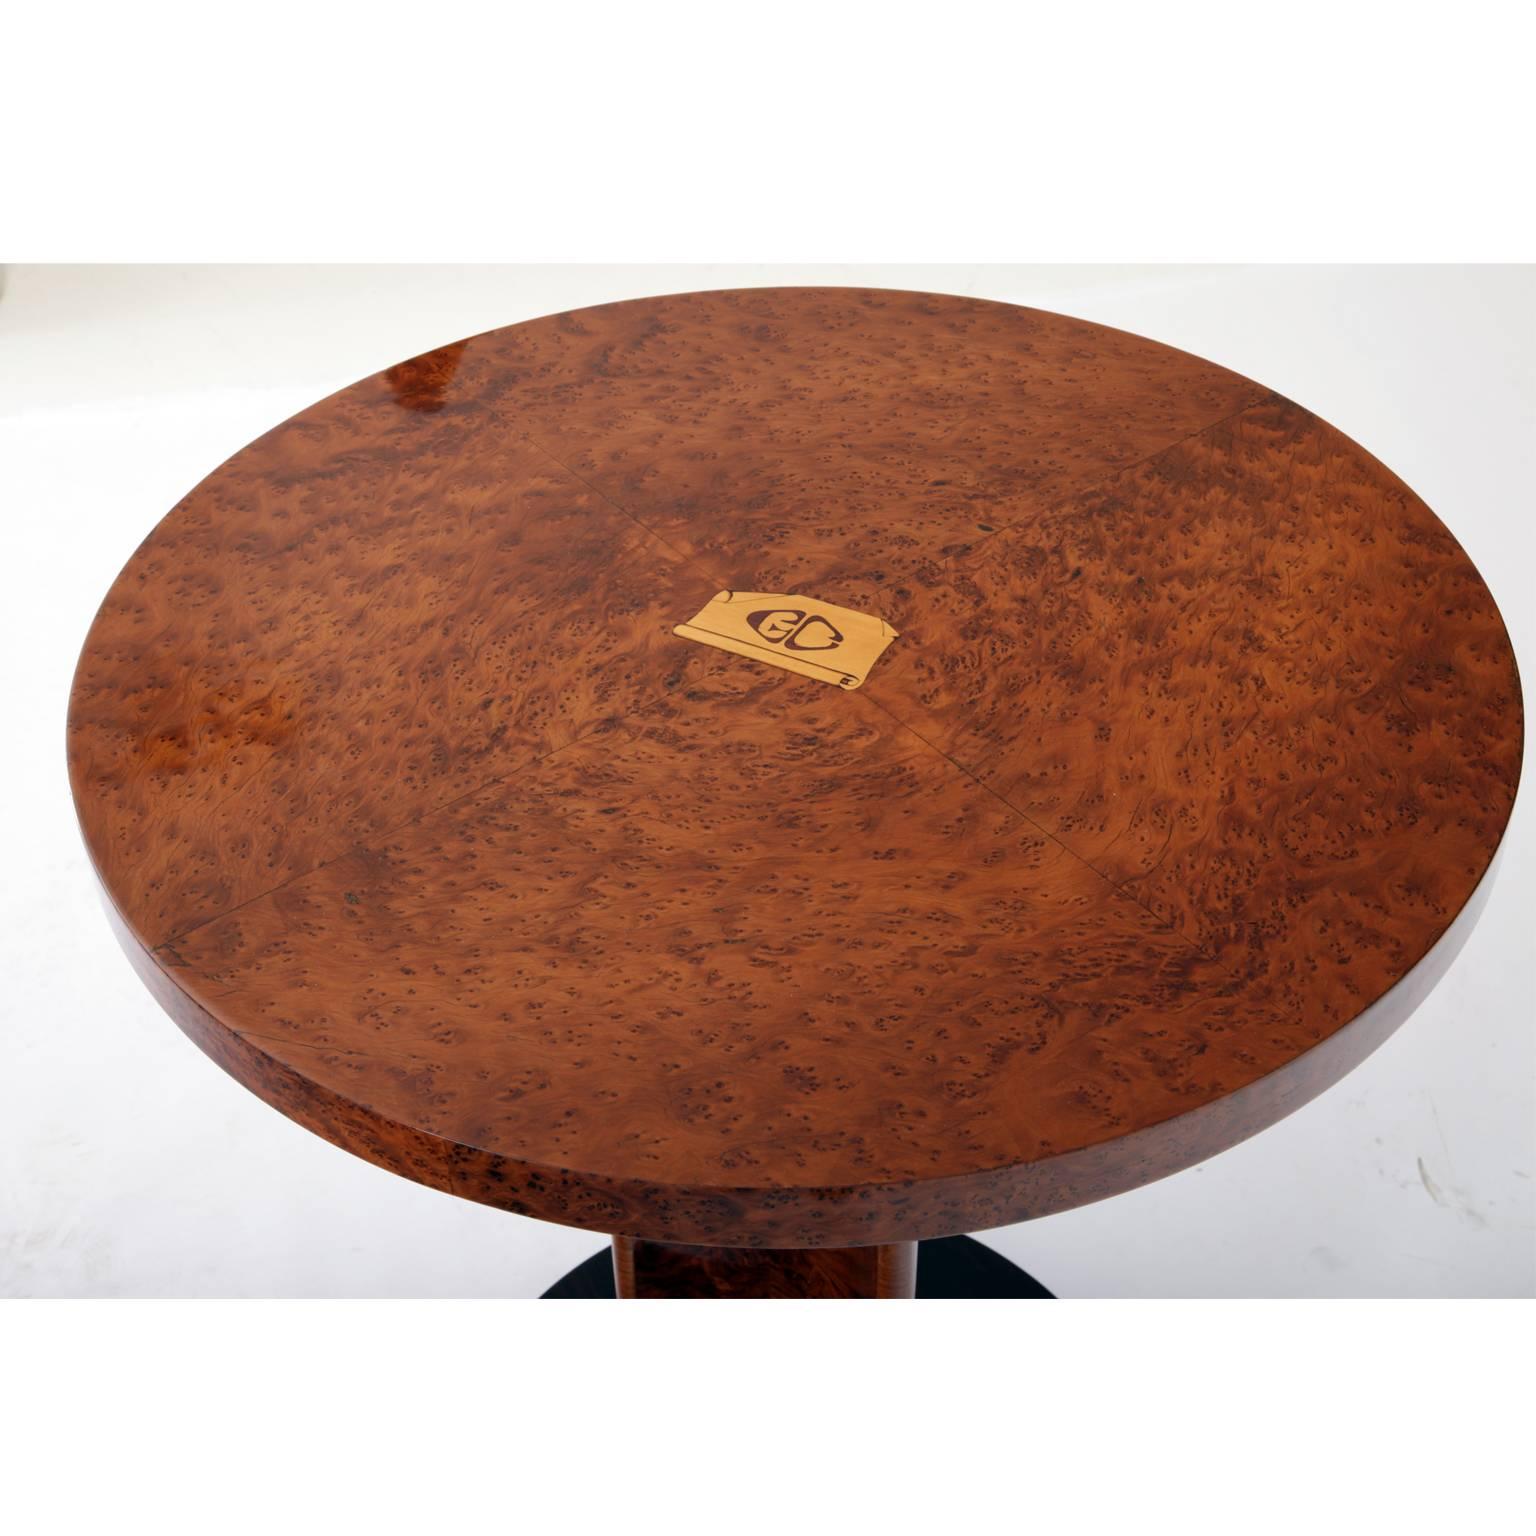 Art Deco side table on a round base with a trefoil stand and a round tabletop. The table is veneered with different woods. The different wooden grains give the table a very interesting and unusual look. The tabletop is inlaid with a GC as well.